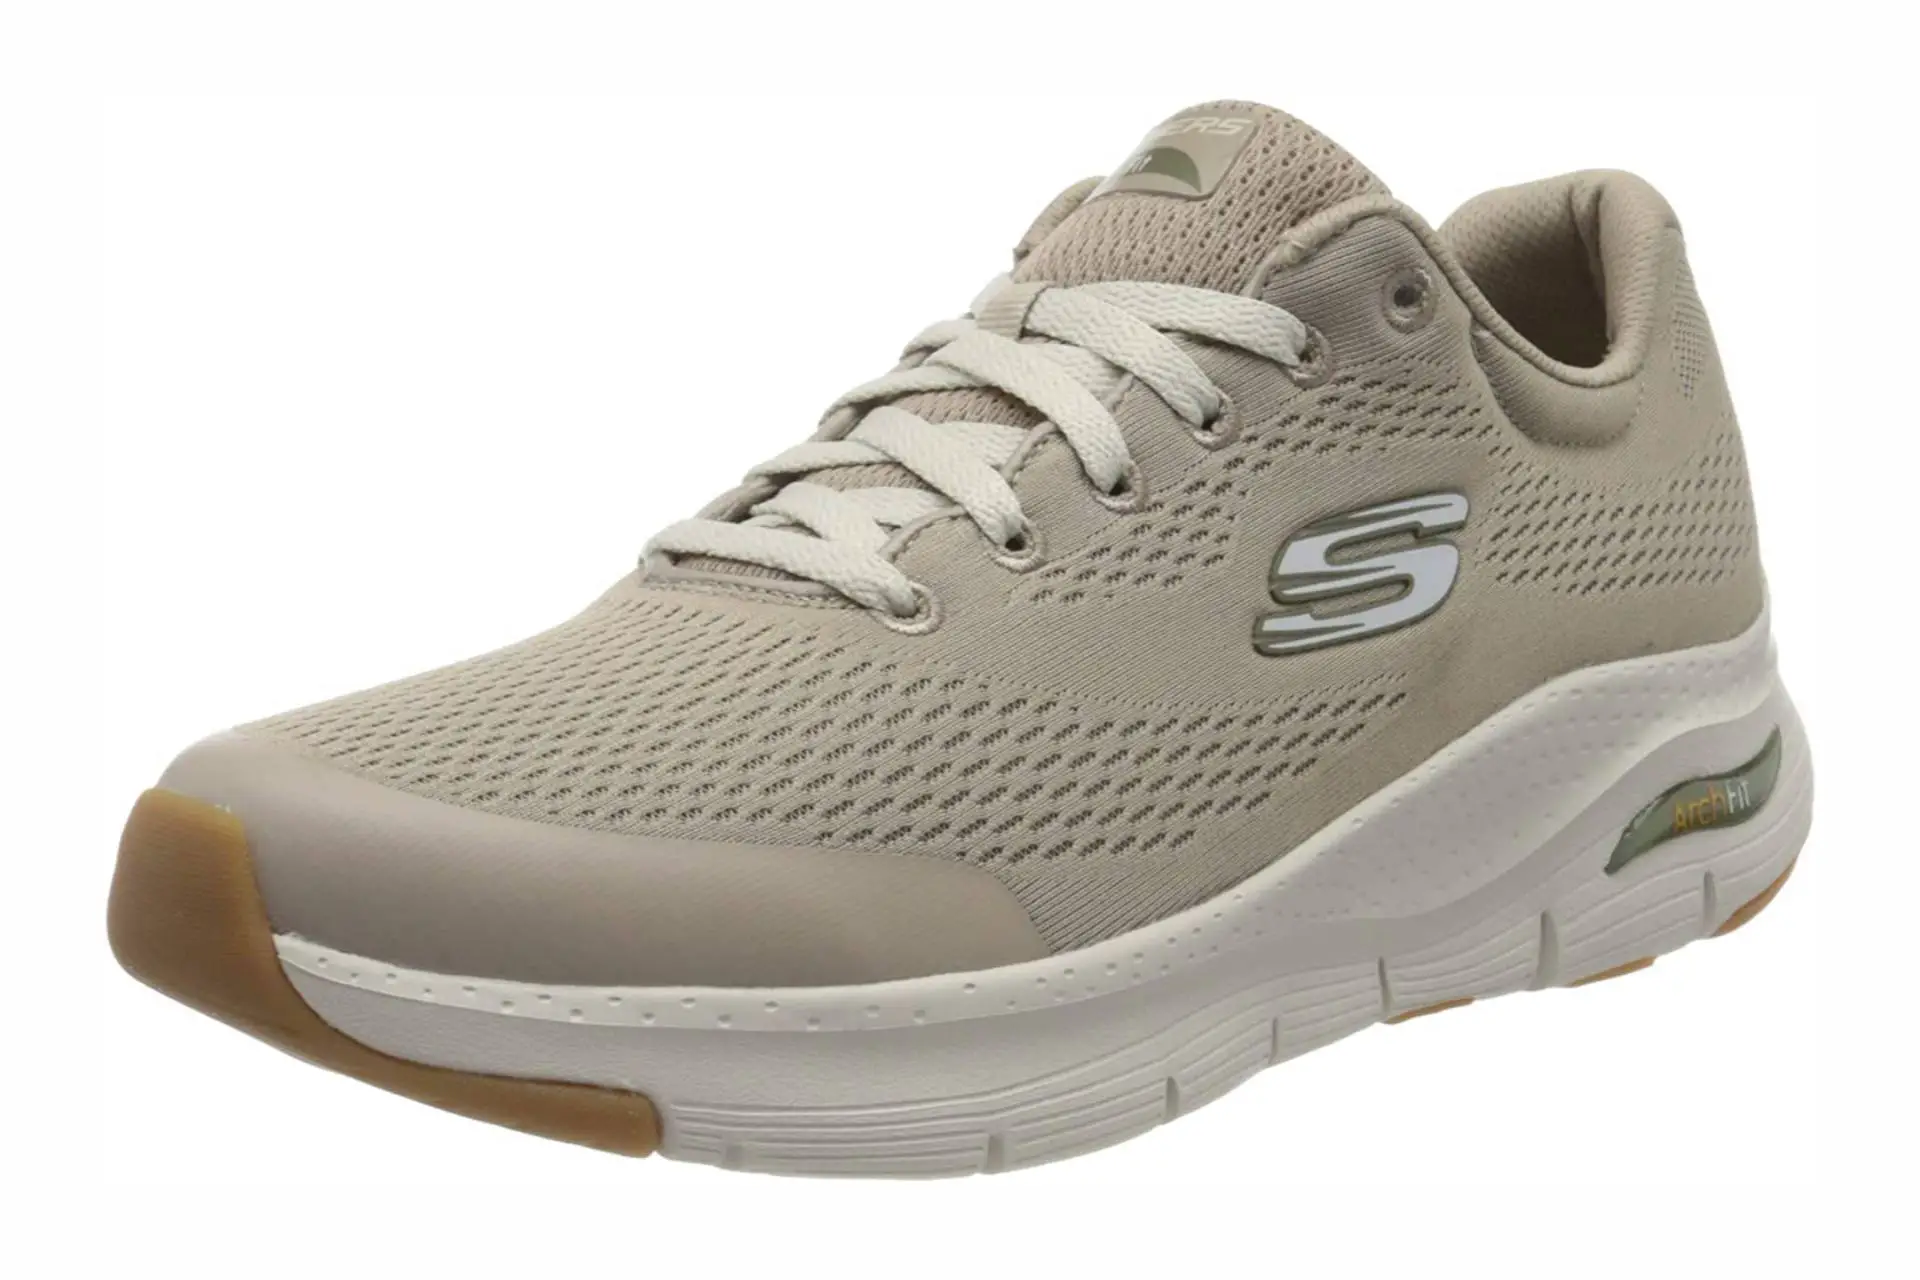 Sneakers for arch support